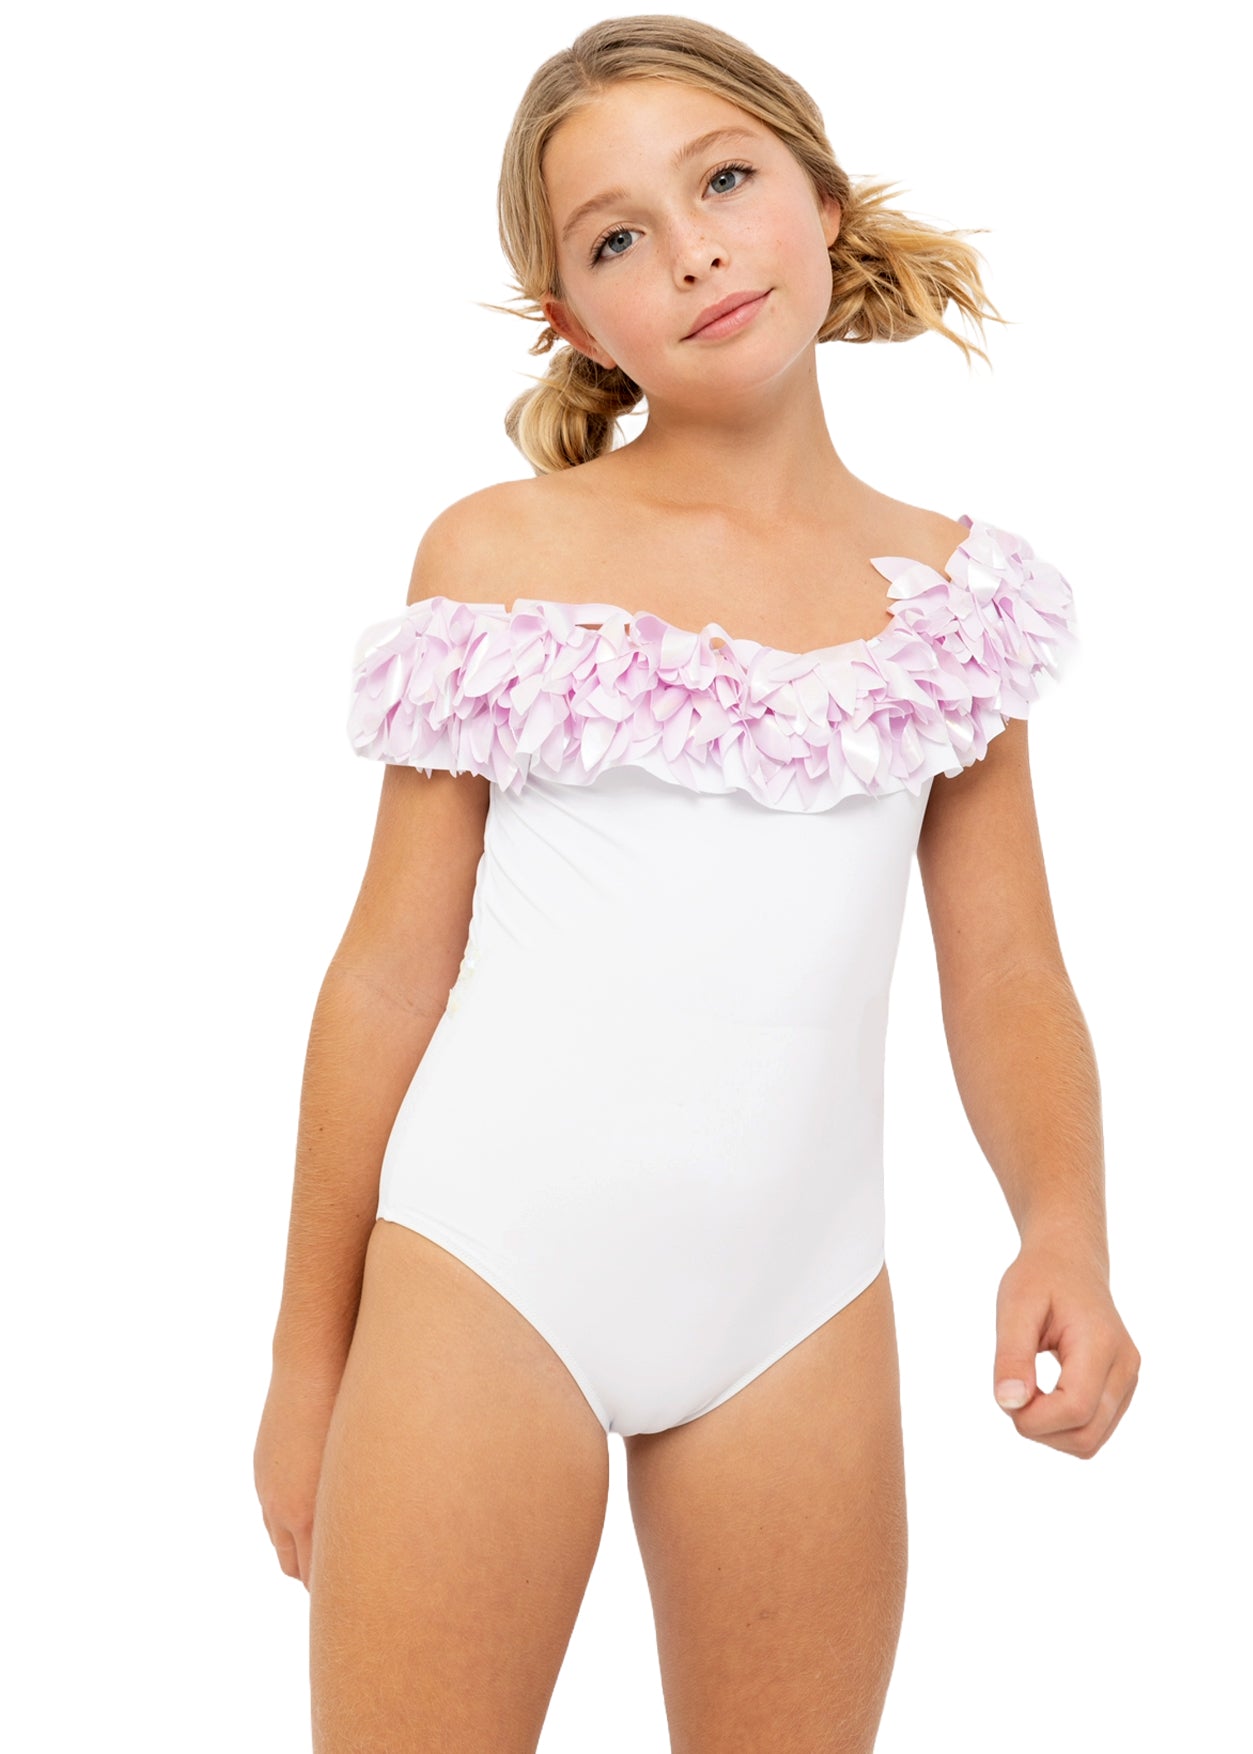 Unique Pink and White Bathingsuit for girls – Stella Cove